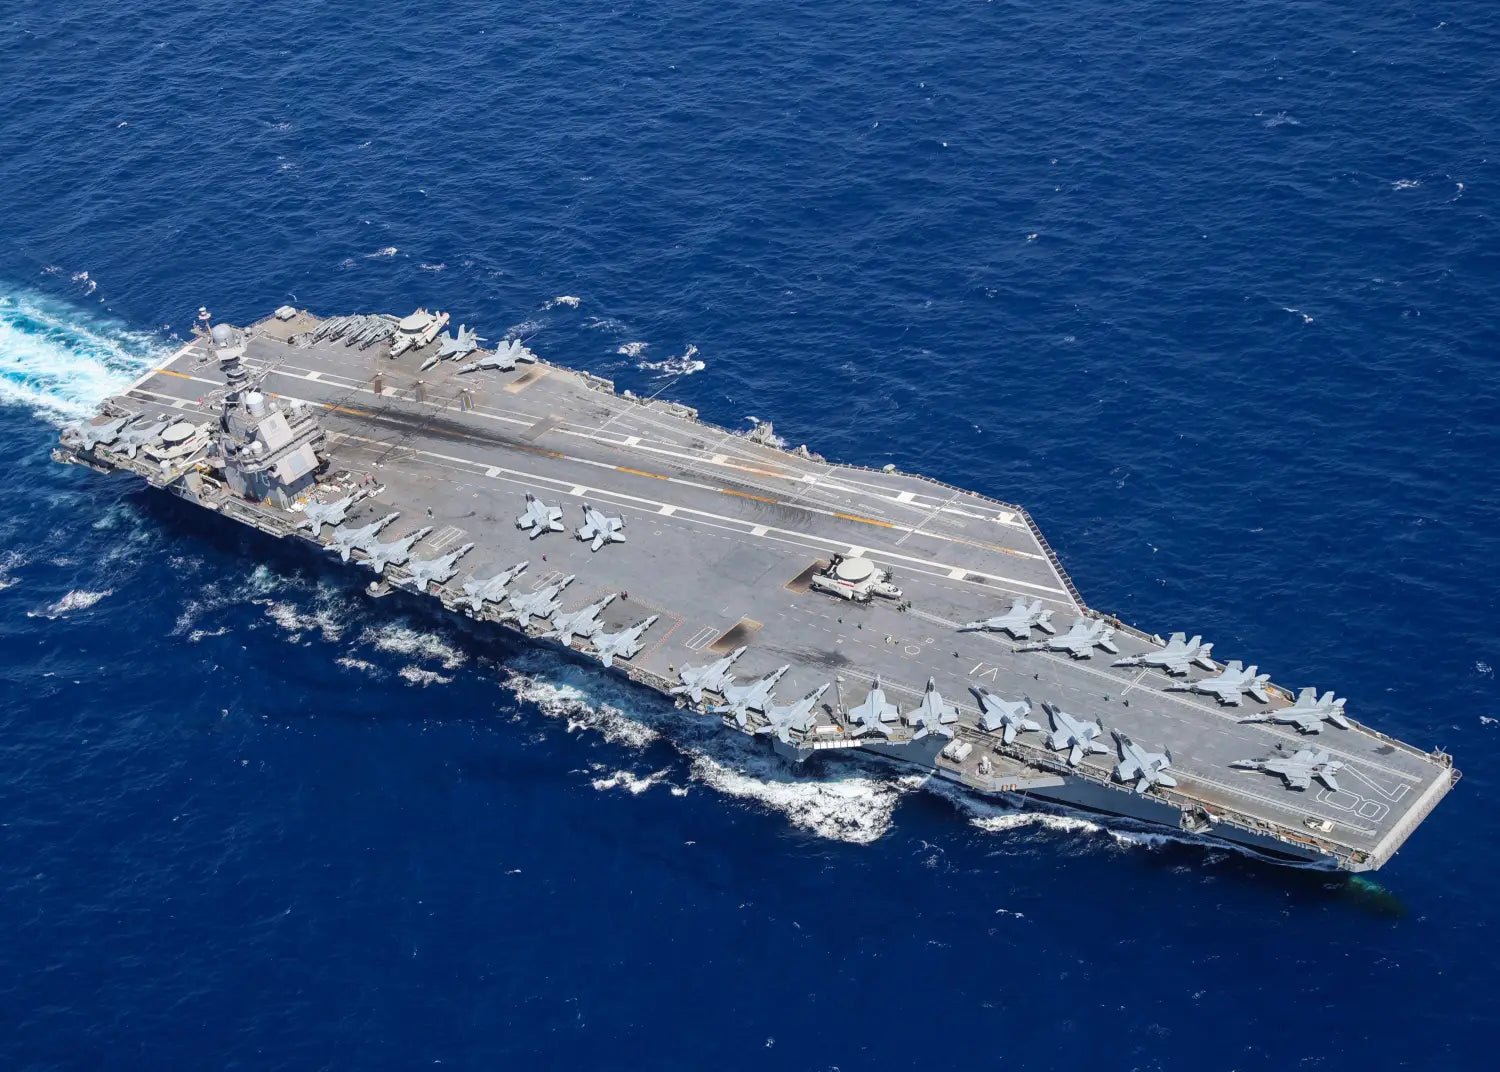 Exploring the USS Gerald R. Ford (CVN-78) Nuclear-Powered Aircraft Carrier - Tactically Acquired